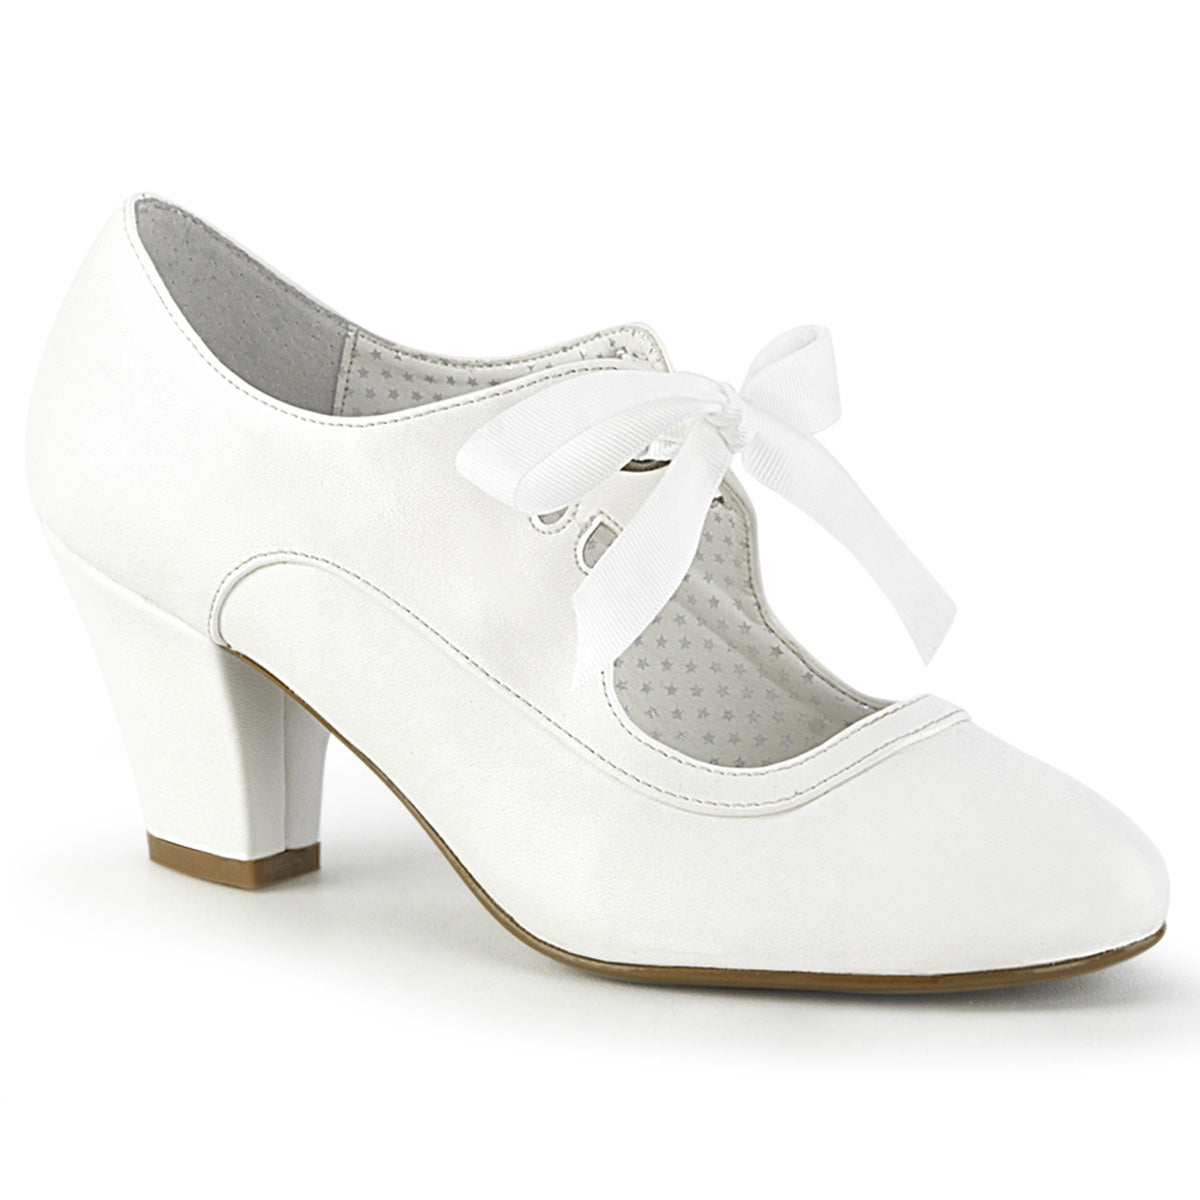 wiggle-32-white-faux-leather-pin-up-couture-single-soles